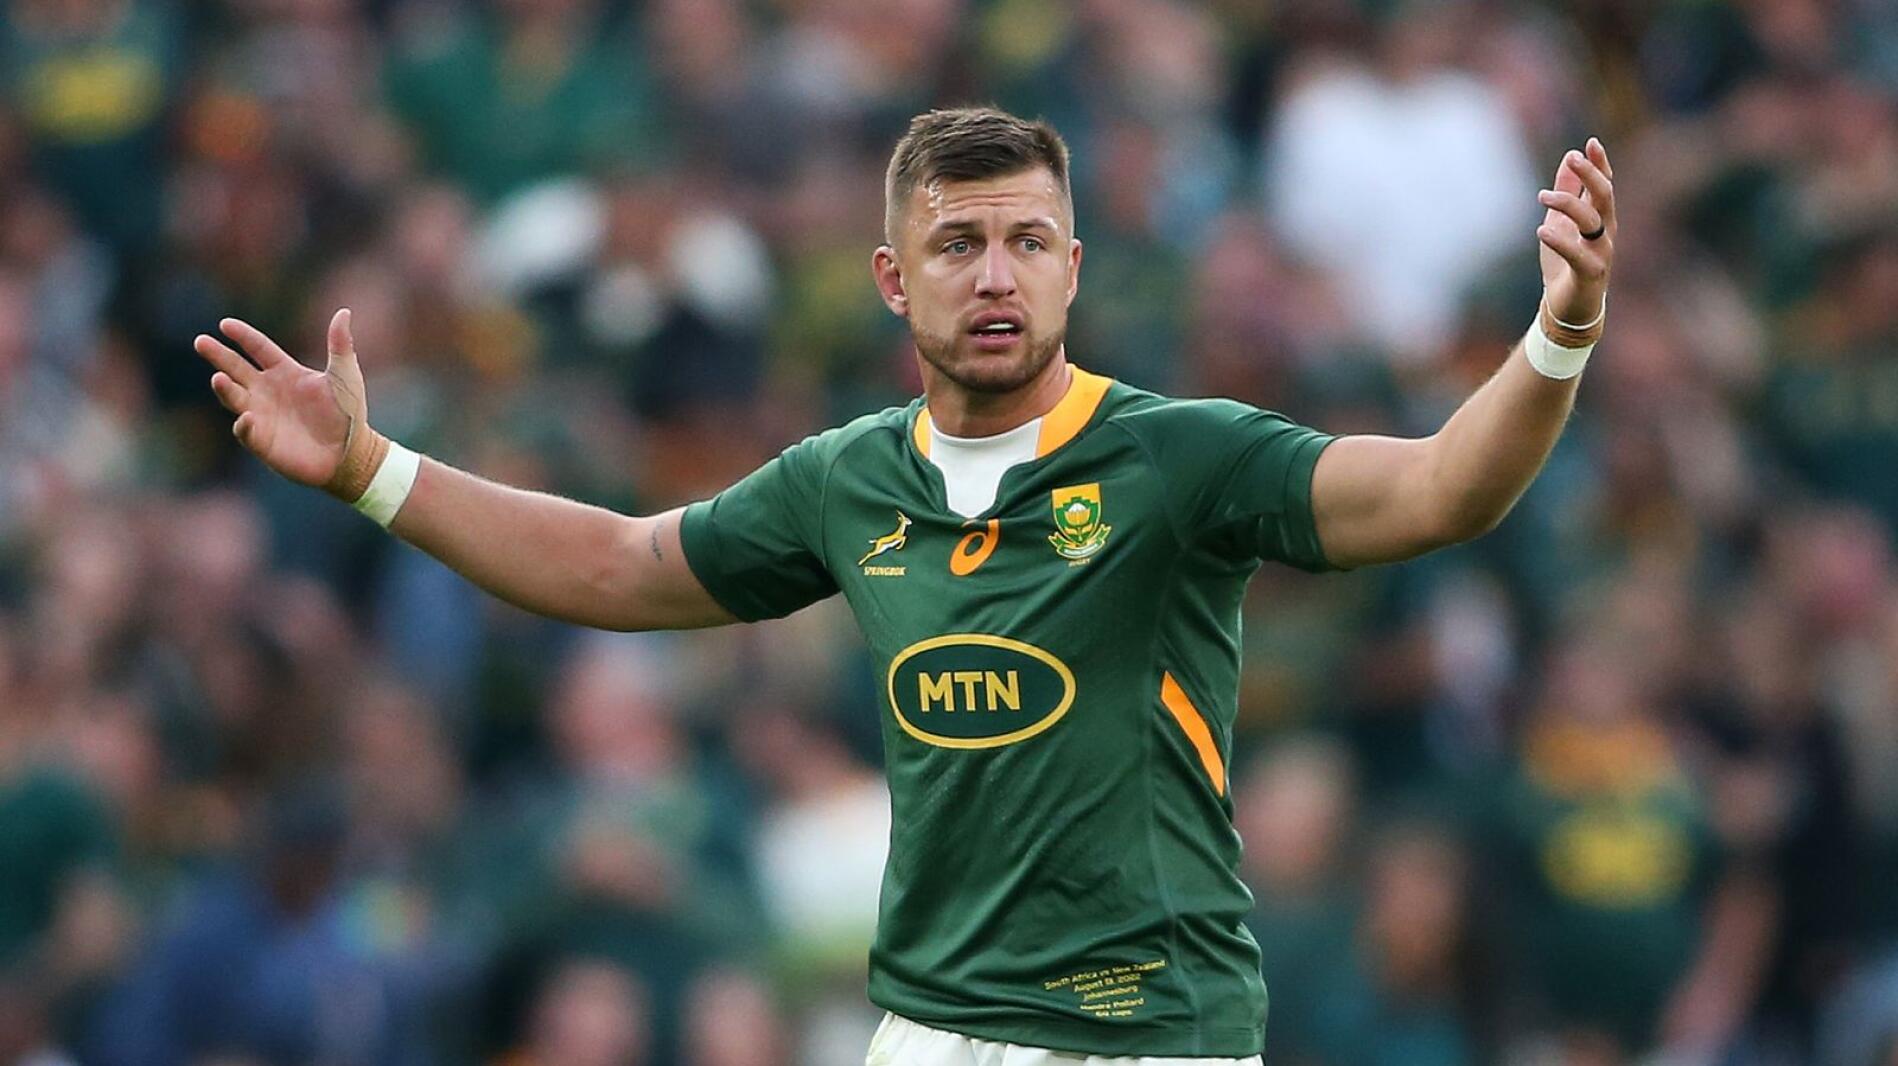 Handre Pollard of South Africa during the 2022 Rugby Championship match against New Zealand at Ellis Park in Johannesburg 